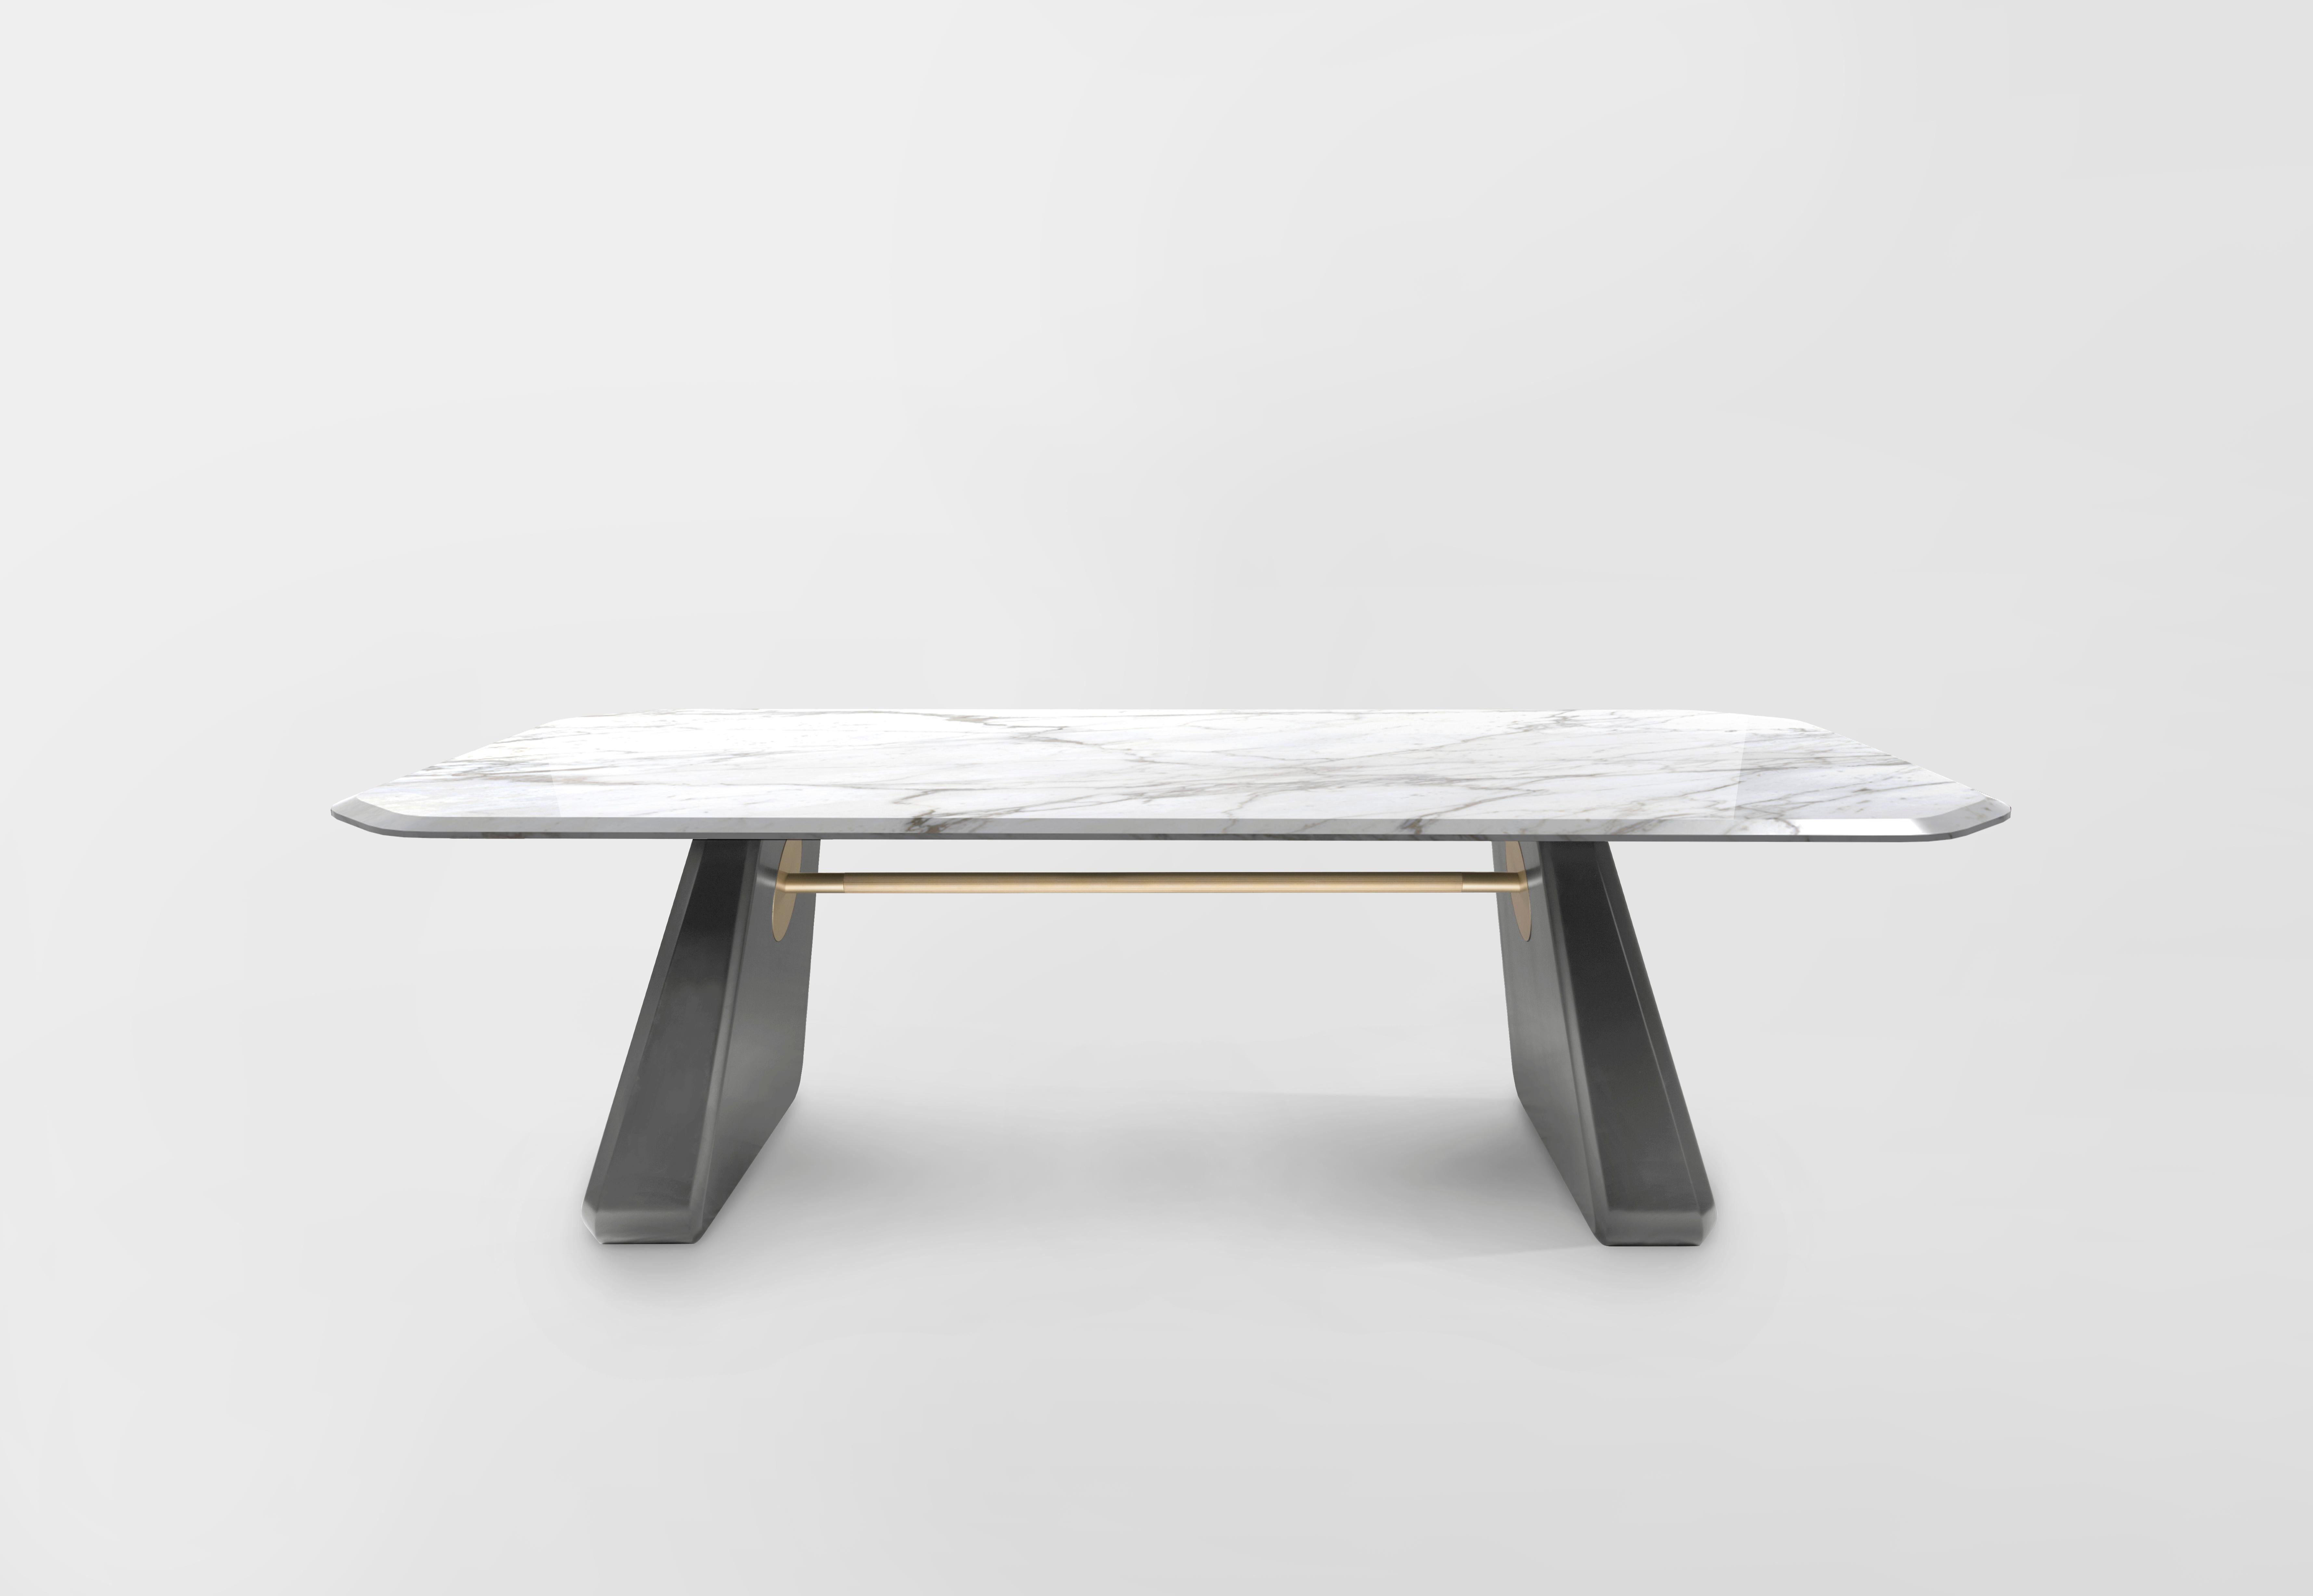 Dining table Henge is a creation by Artefatto Design Studio for Secolo

Height: 74cm

Top size:
- 180 x 110cm
- 210 x 120cm
- 240 x 130cm

Customization:
– Top size
– Top shape (rounded or beveled)
– Type of wood
– Type of marble.